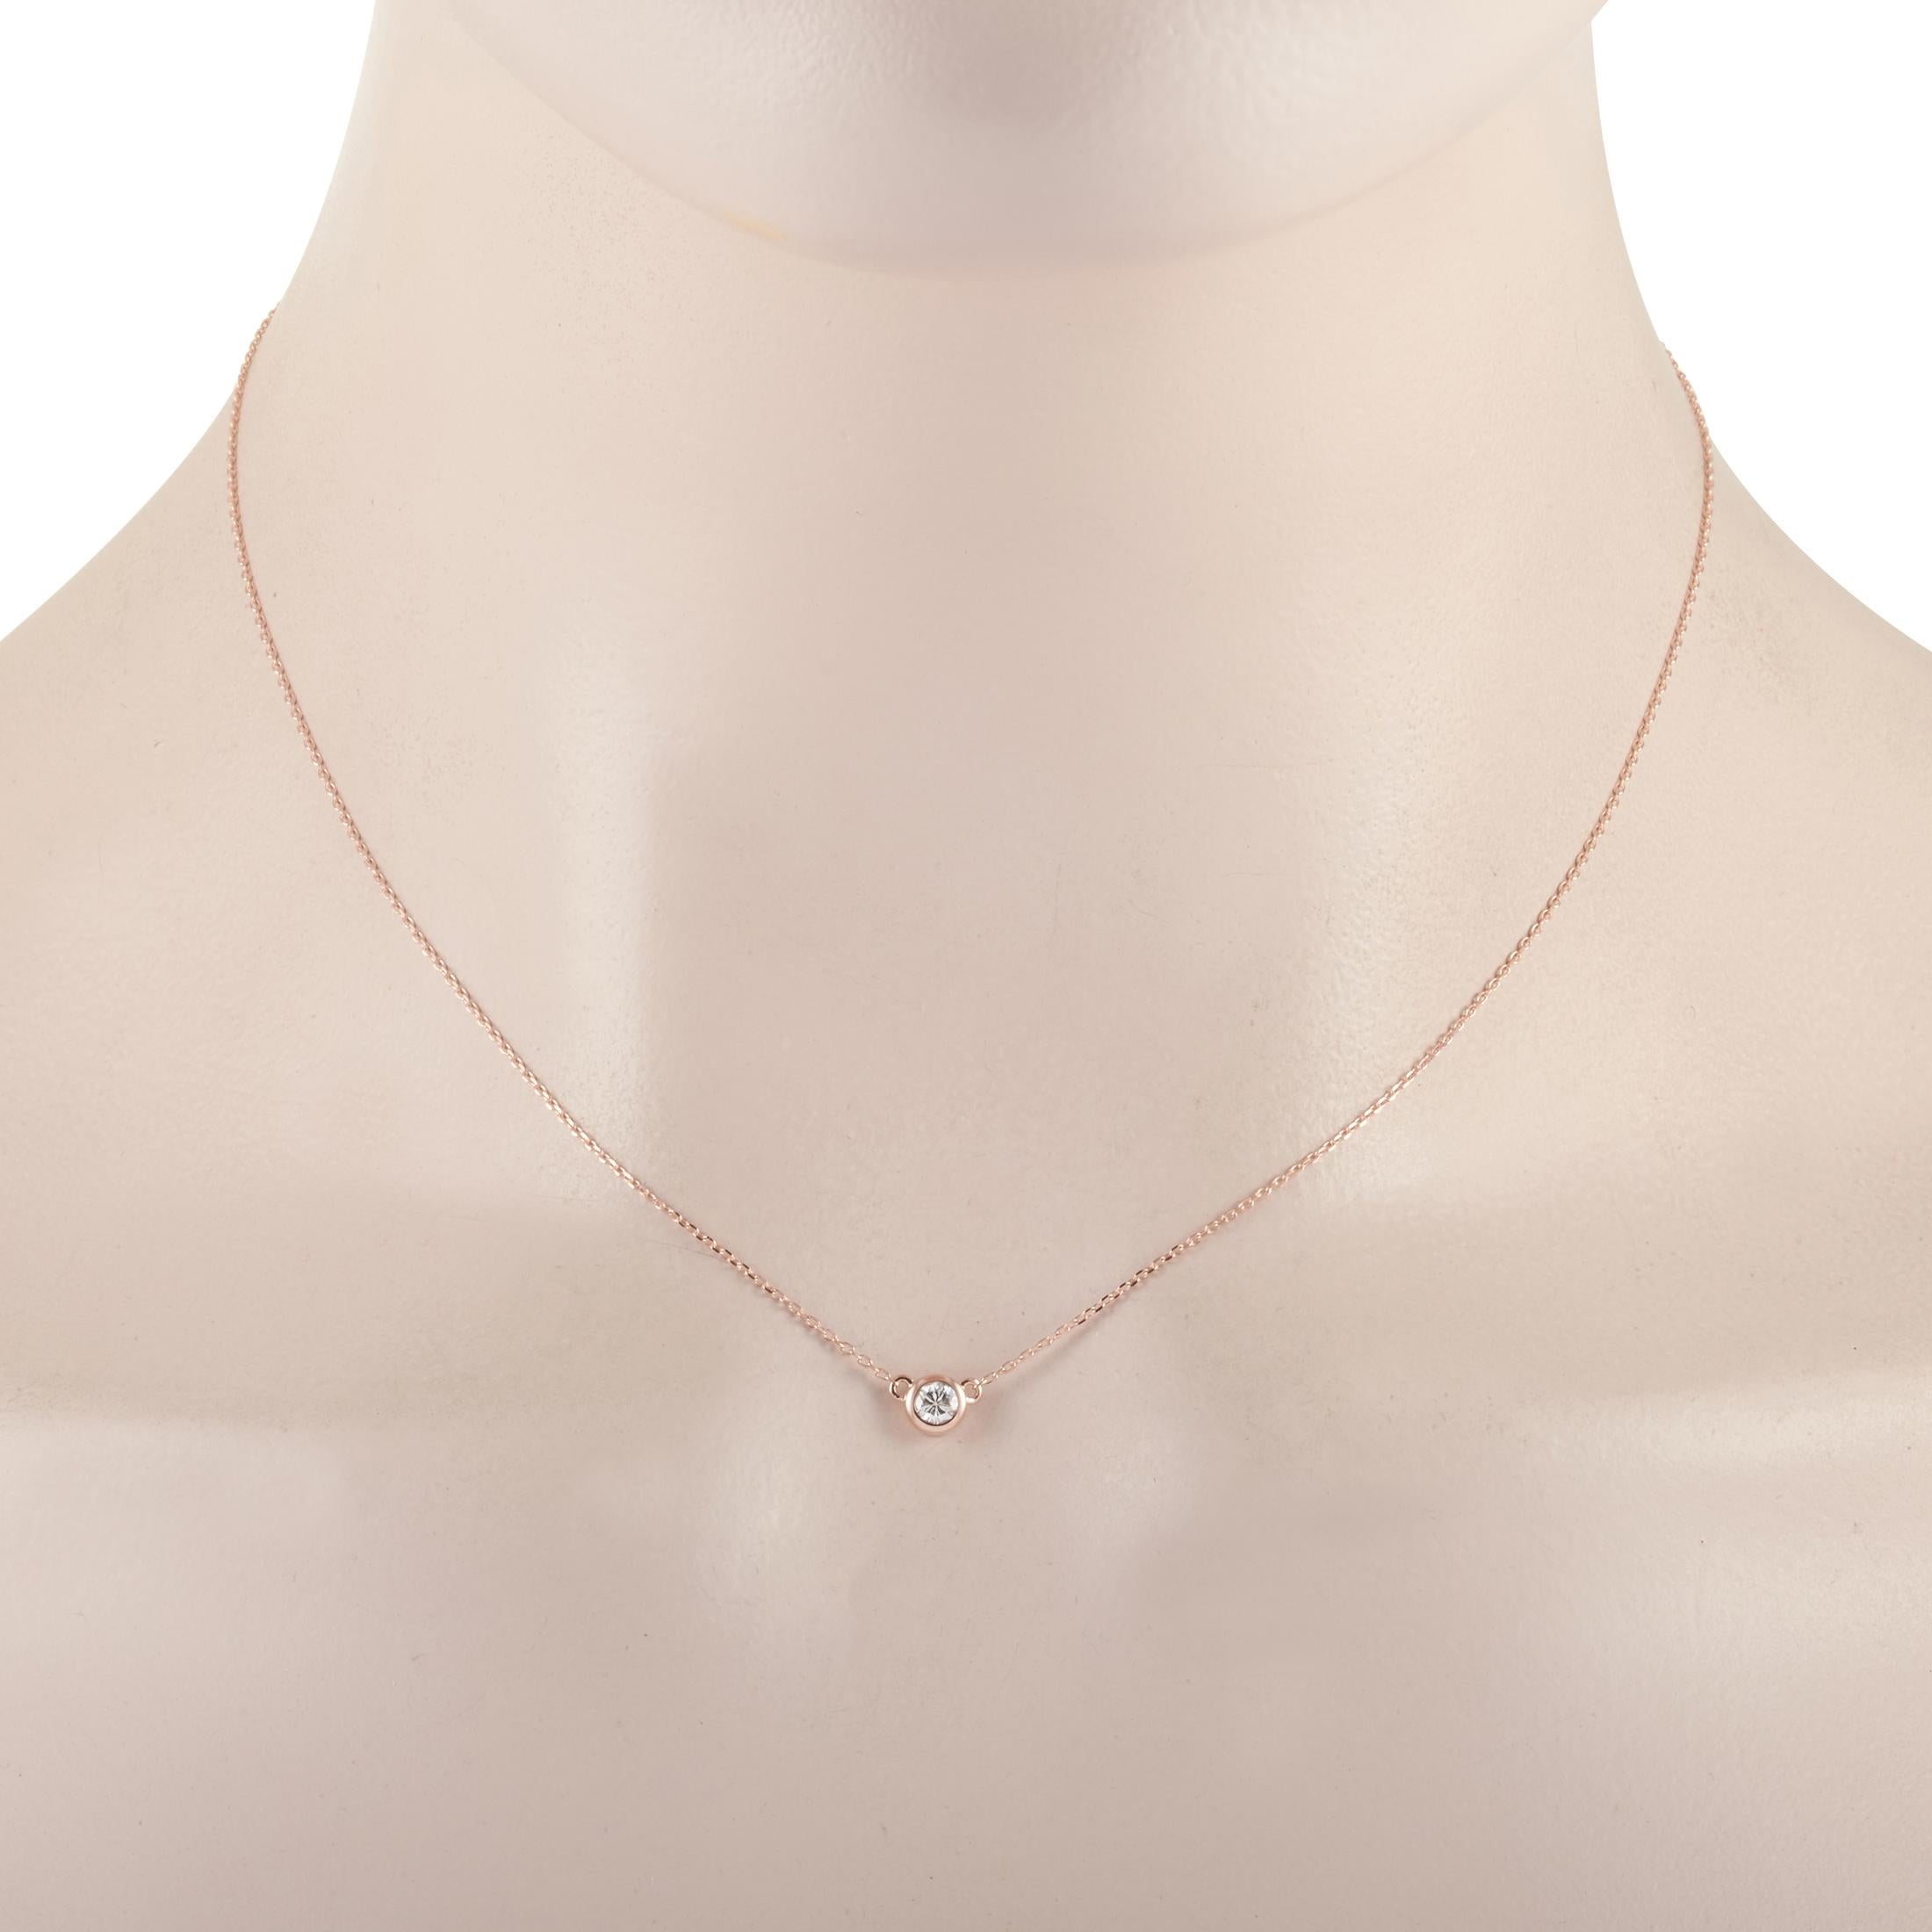 This LB Exclusive necklace is made of 14K rose gold and embellished with a 0.16 ct diamond stone. The necklace weighs 1.4 grams and boasts a 15” chain and a pendant that measures 0.19” in length and 0.19” in width.
 
 Offered in brand new